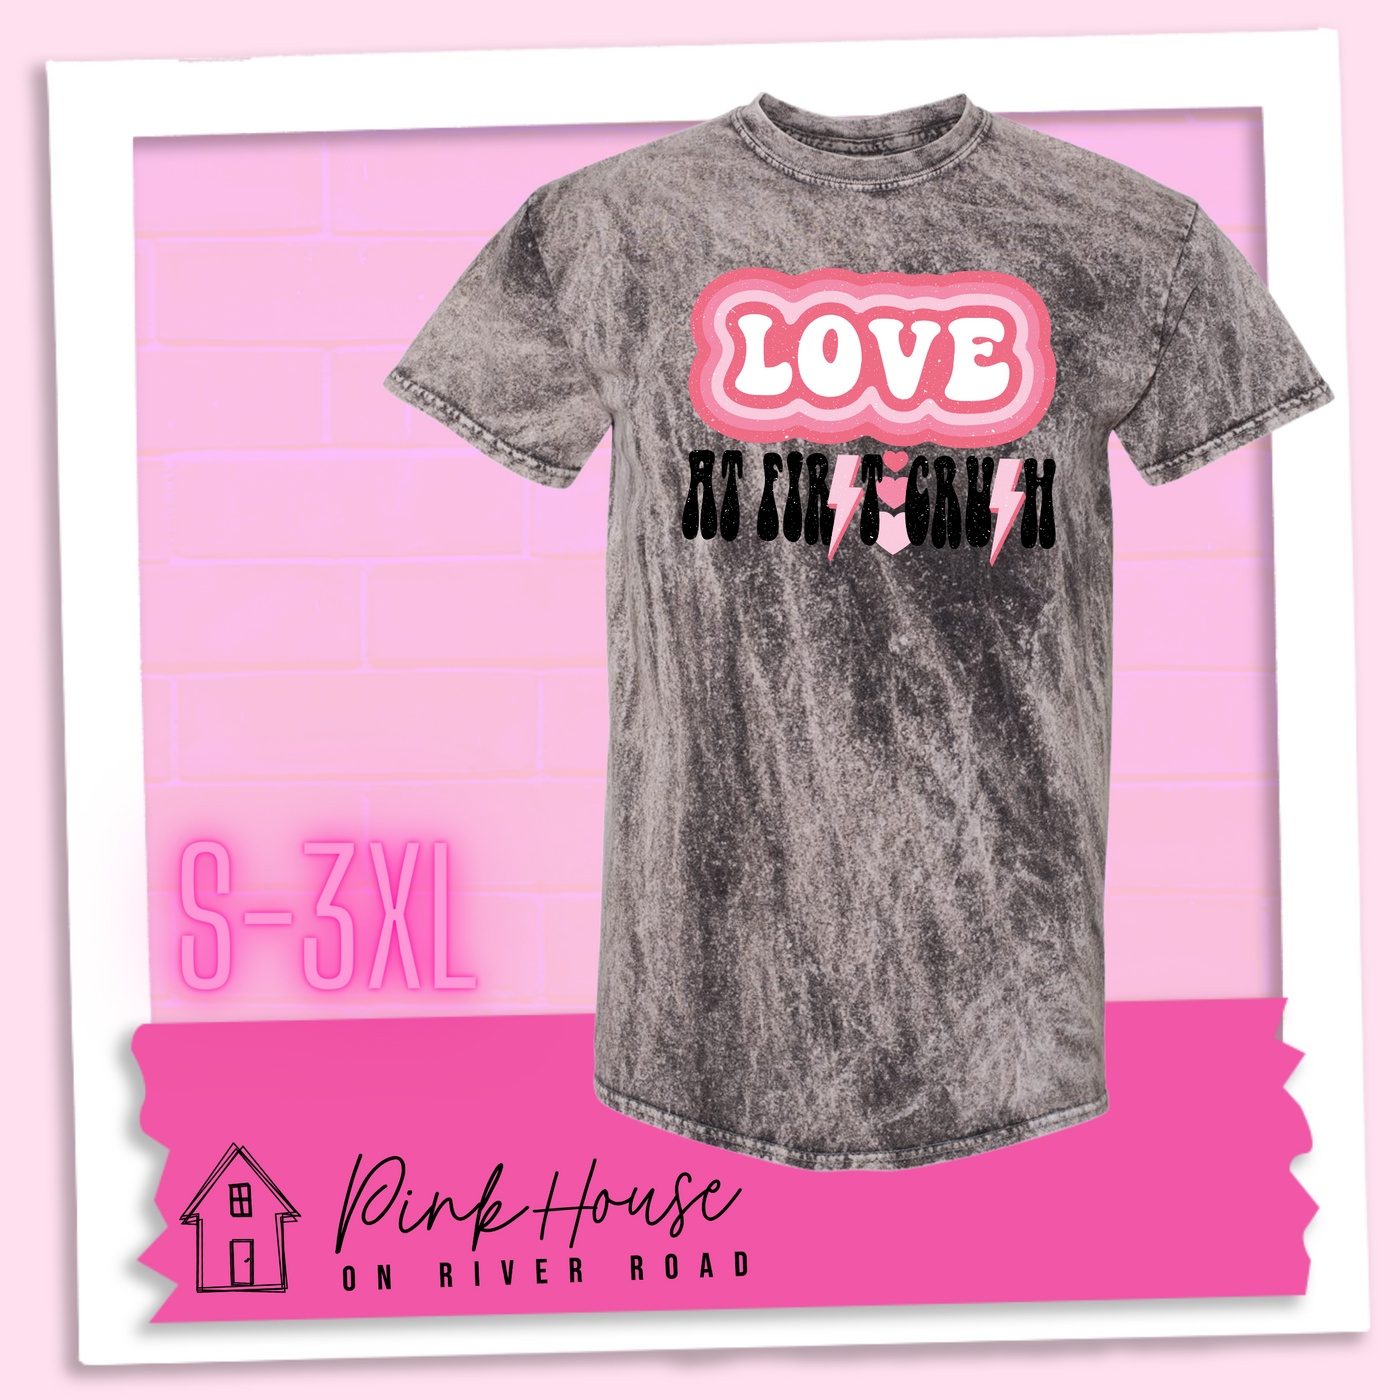 Charcoal Mineral Wash Tee. The graphic has the word Love in retro bubble letters with differetn colored pink outlines radiating from the word, underneath are the worxs at first in black with the s in first replaced with a pink lightning bolt, then there are three different colored hearts followed by the word crush in the same black font with the S replaced with the same pink lightening bolt.